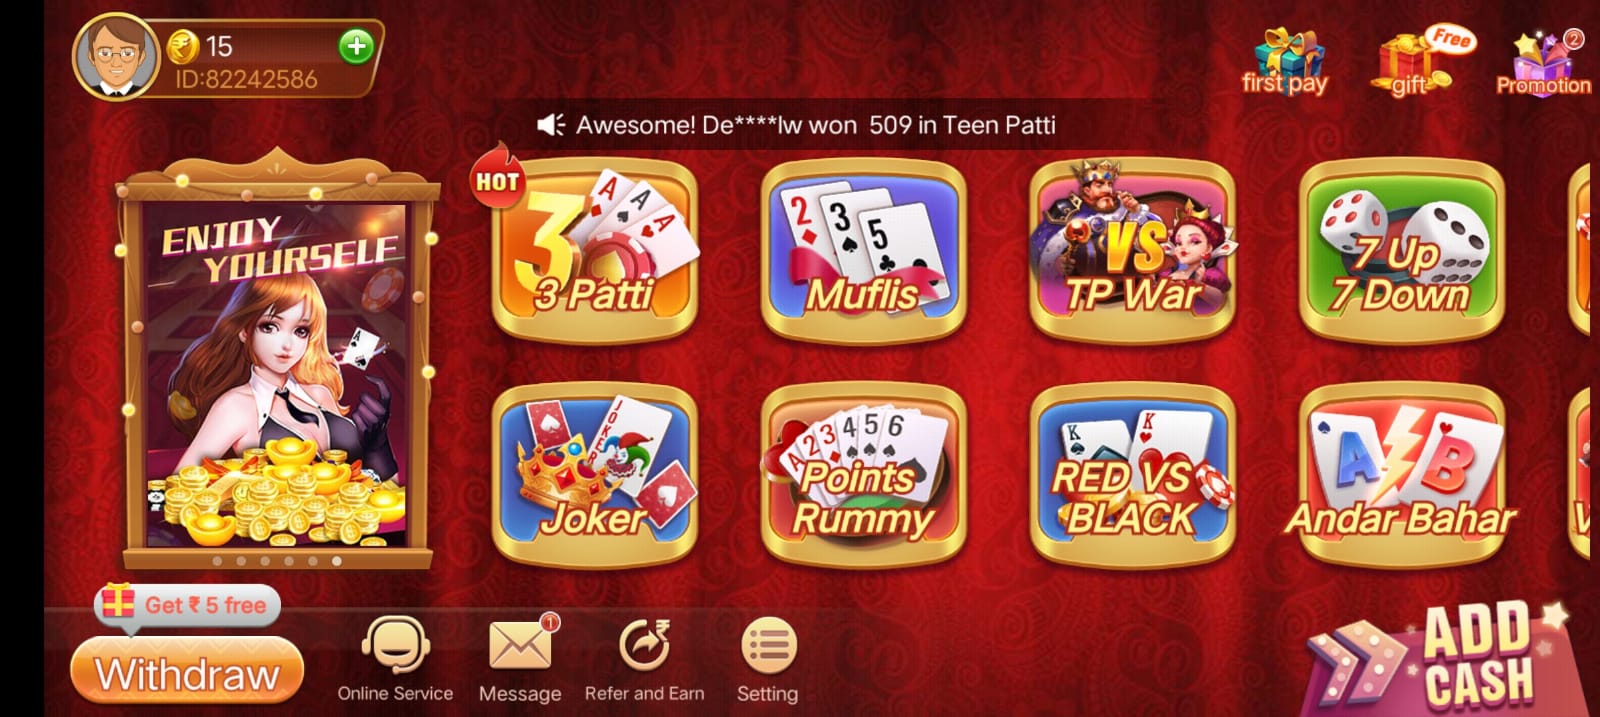 Available Games on Teen Patti Club App